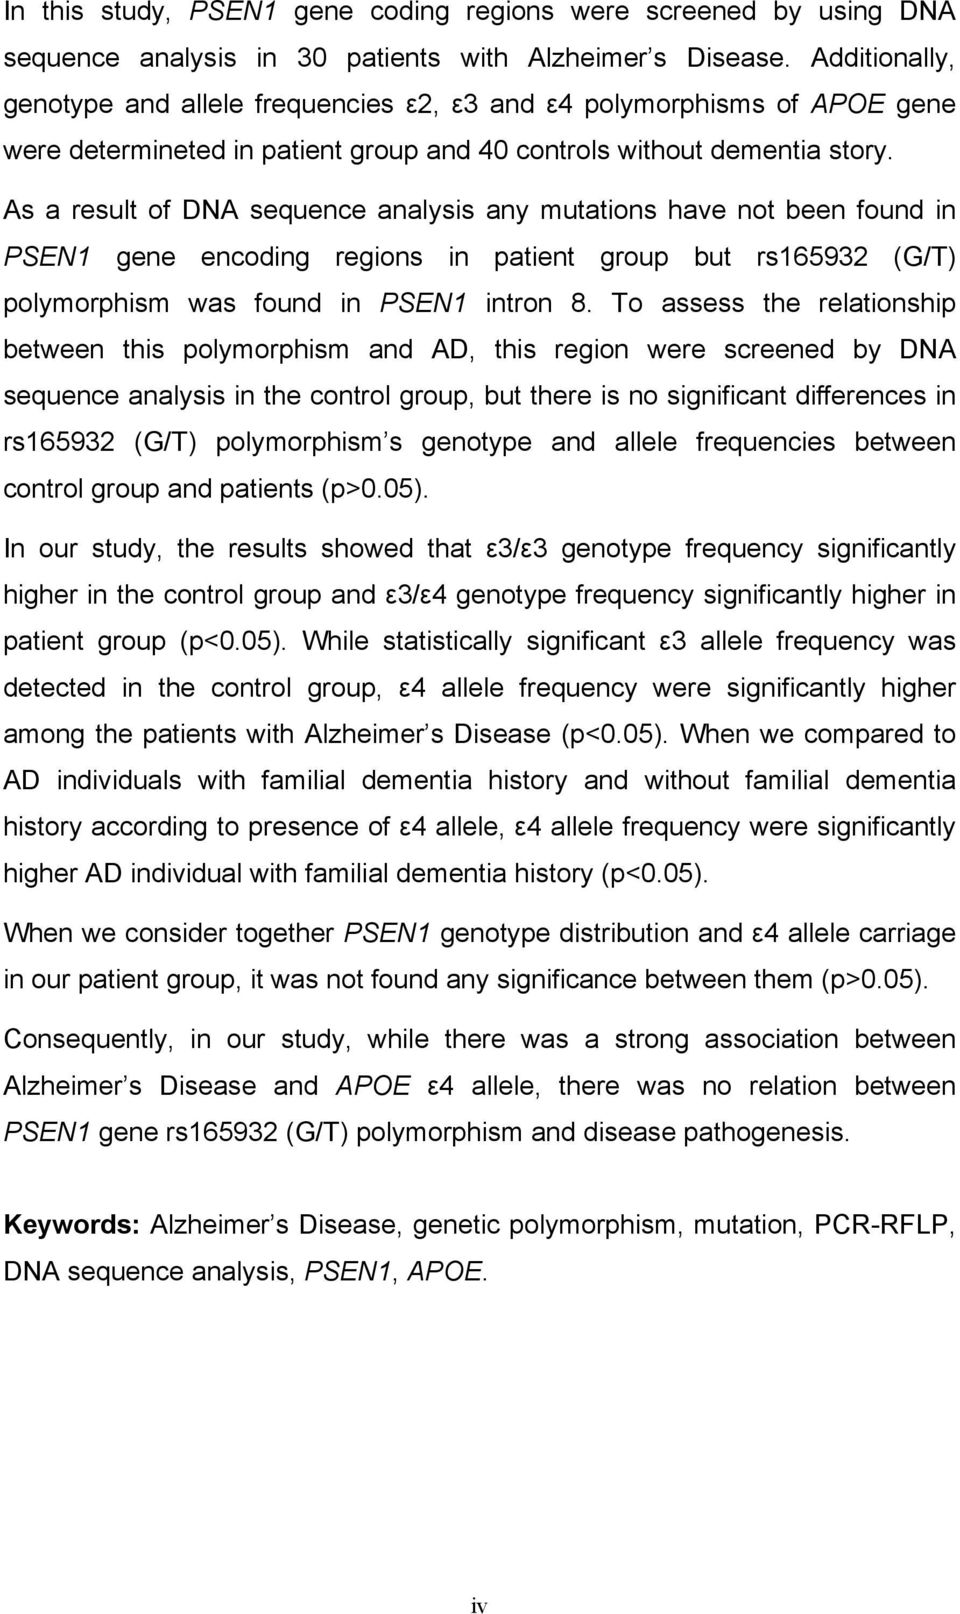 As a result of DNA sequence analysis any mutations have not been found in PSEN1 gene encoding regions in patient group but rs165932 (G/T) polymorphism was found in PSEN1 intron 8.